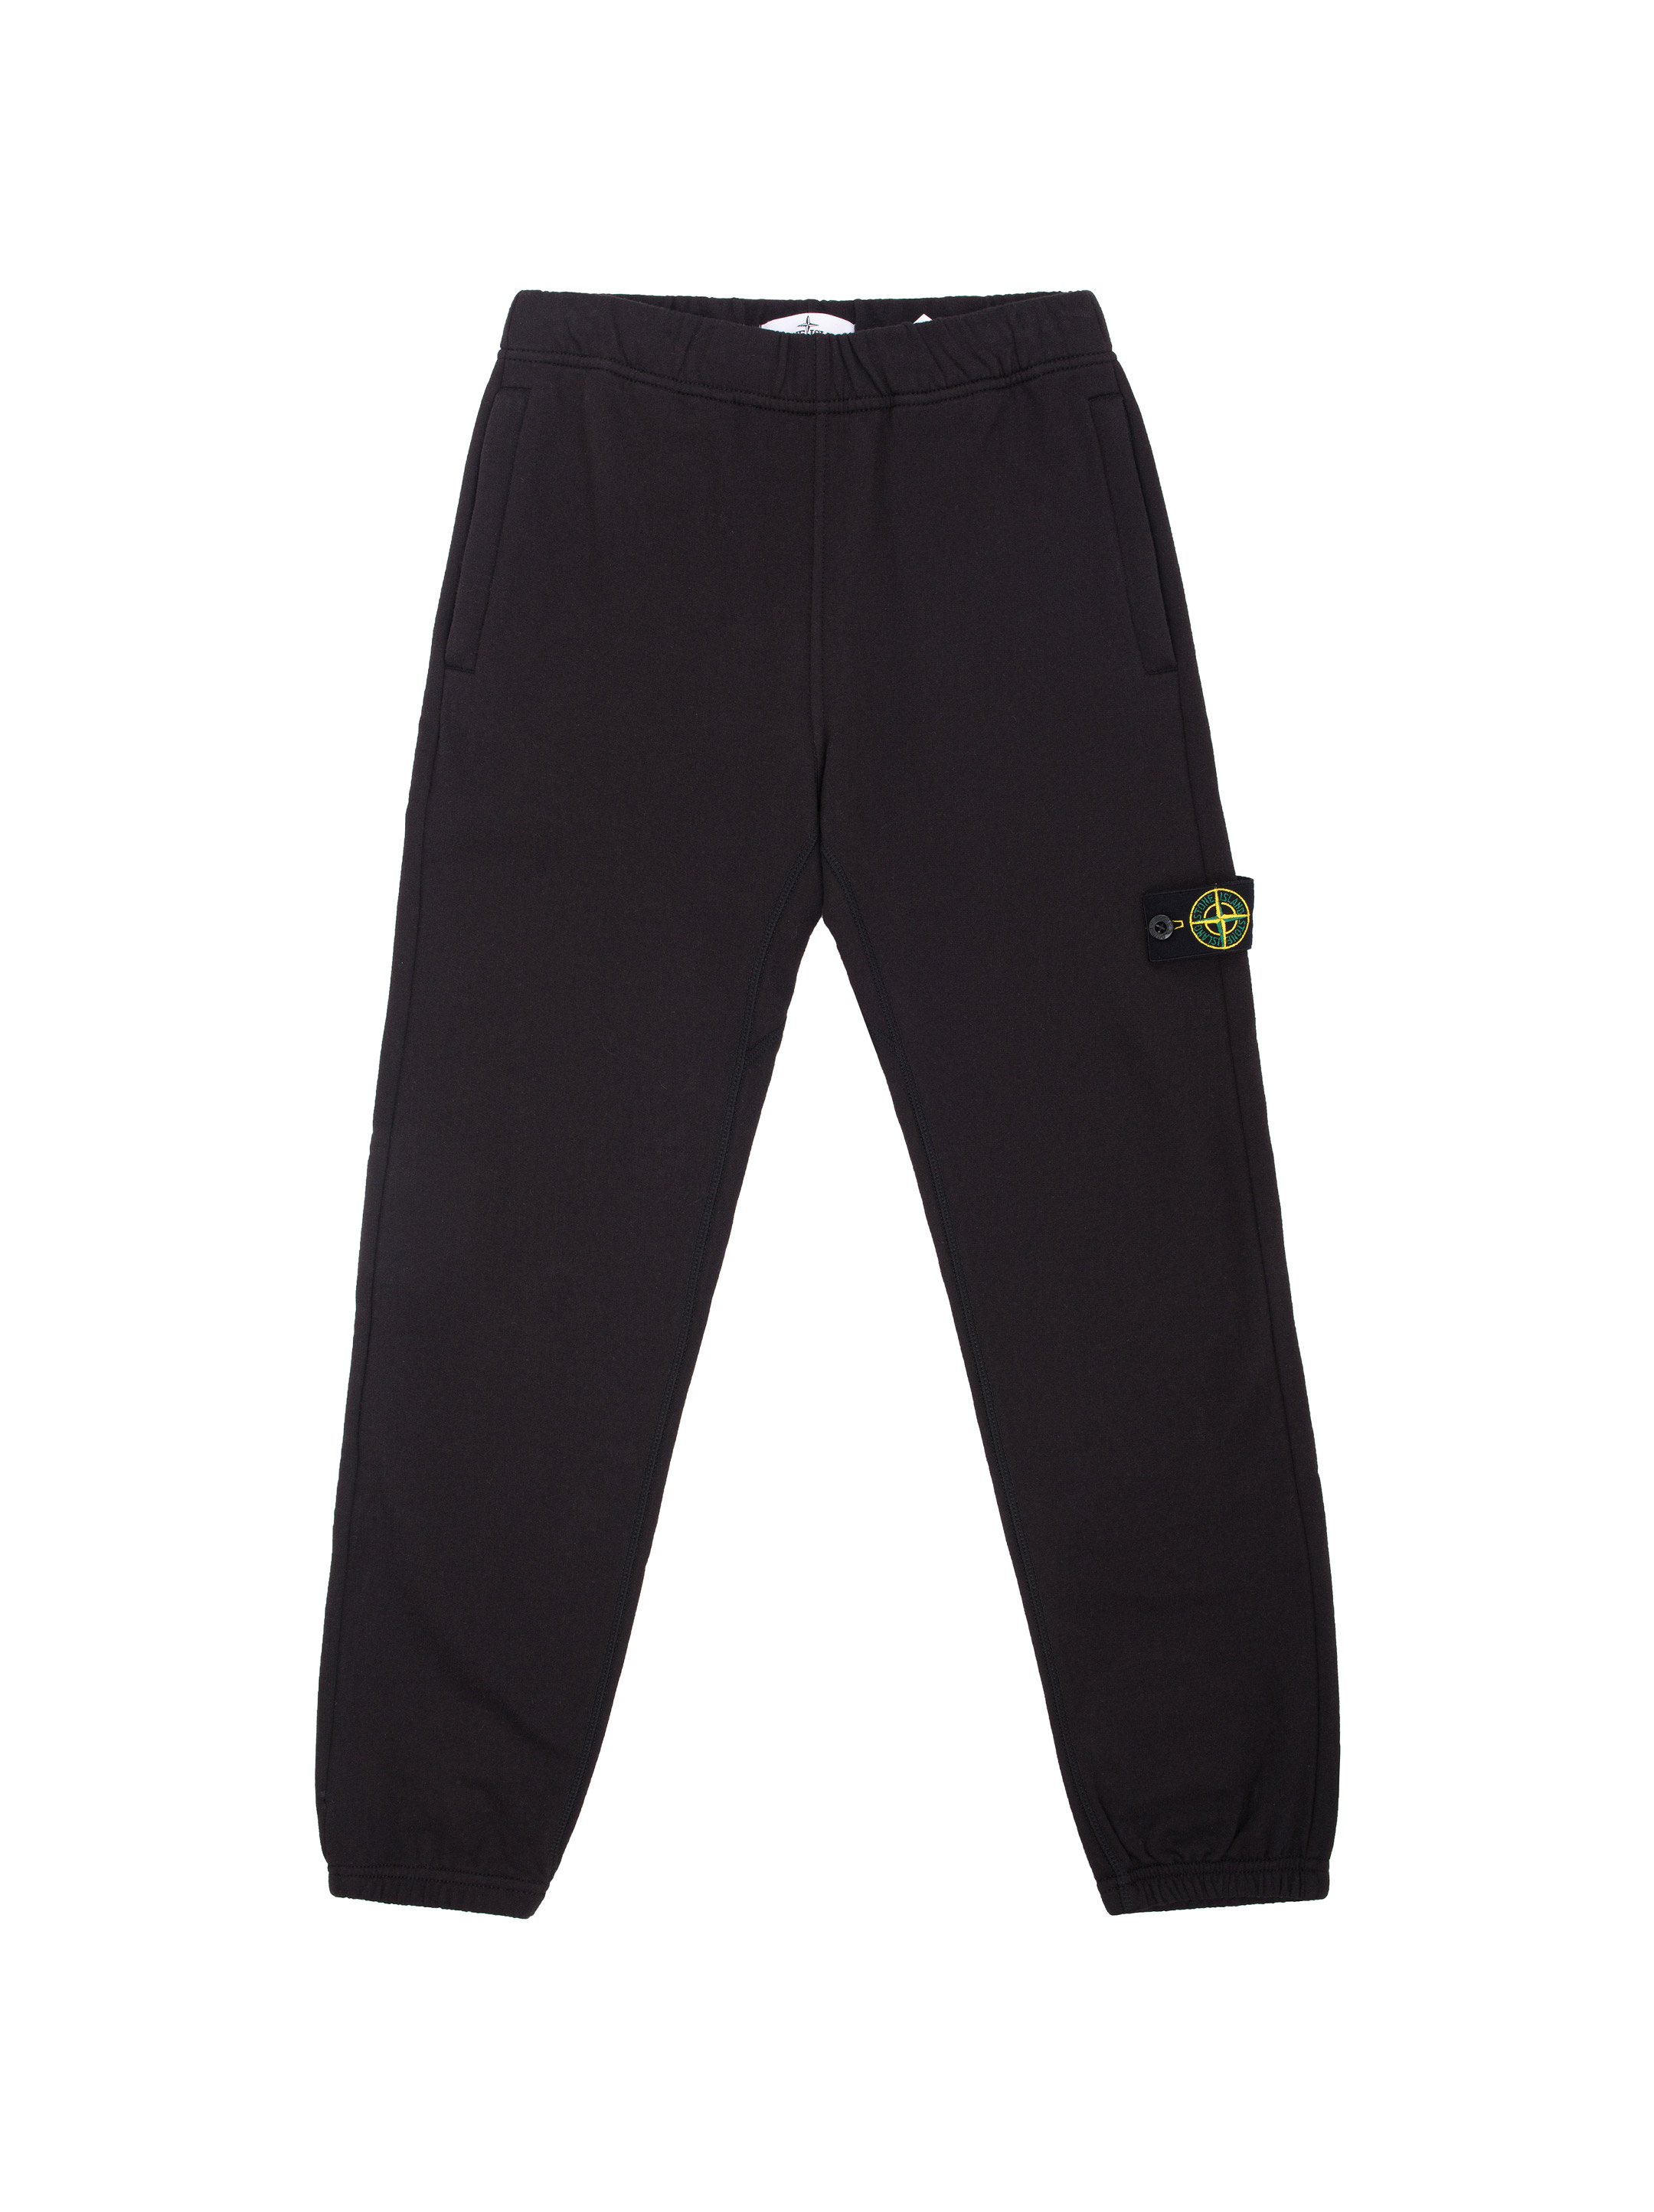 Stone Island kids' Cotton sport pants buy for 117600 KZT in the official  Viled online store, art.